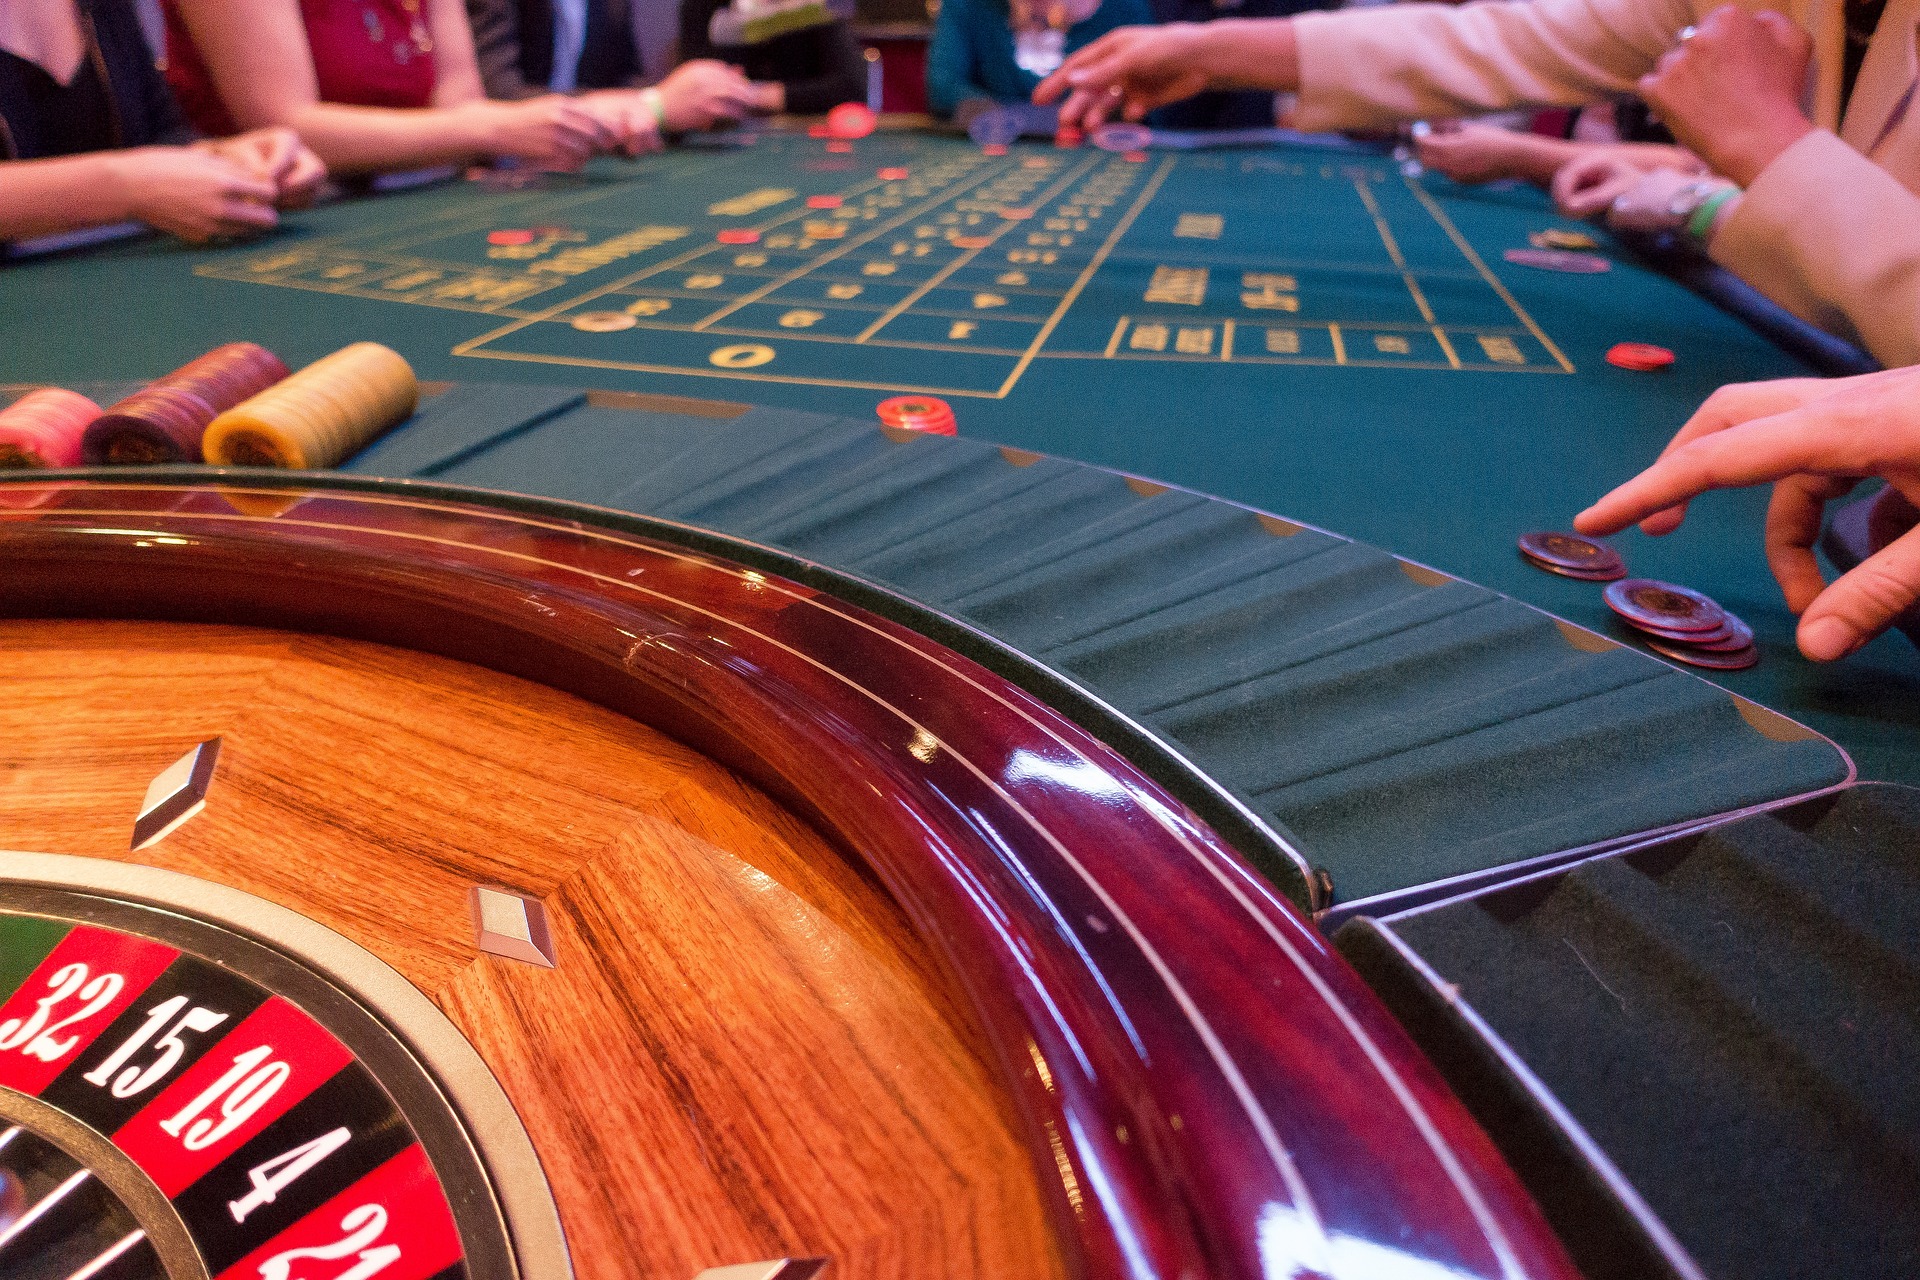 Roulette table with people placing their bets.